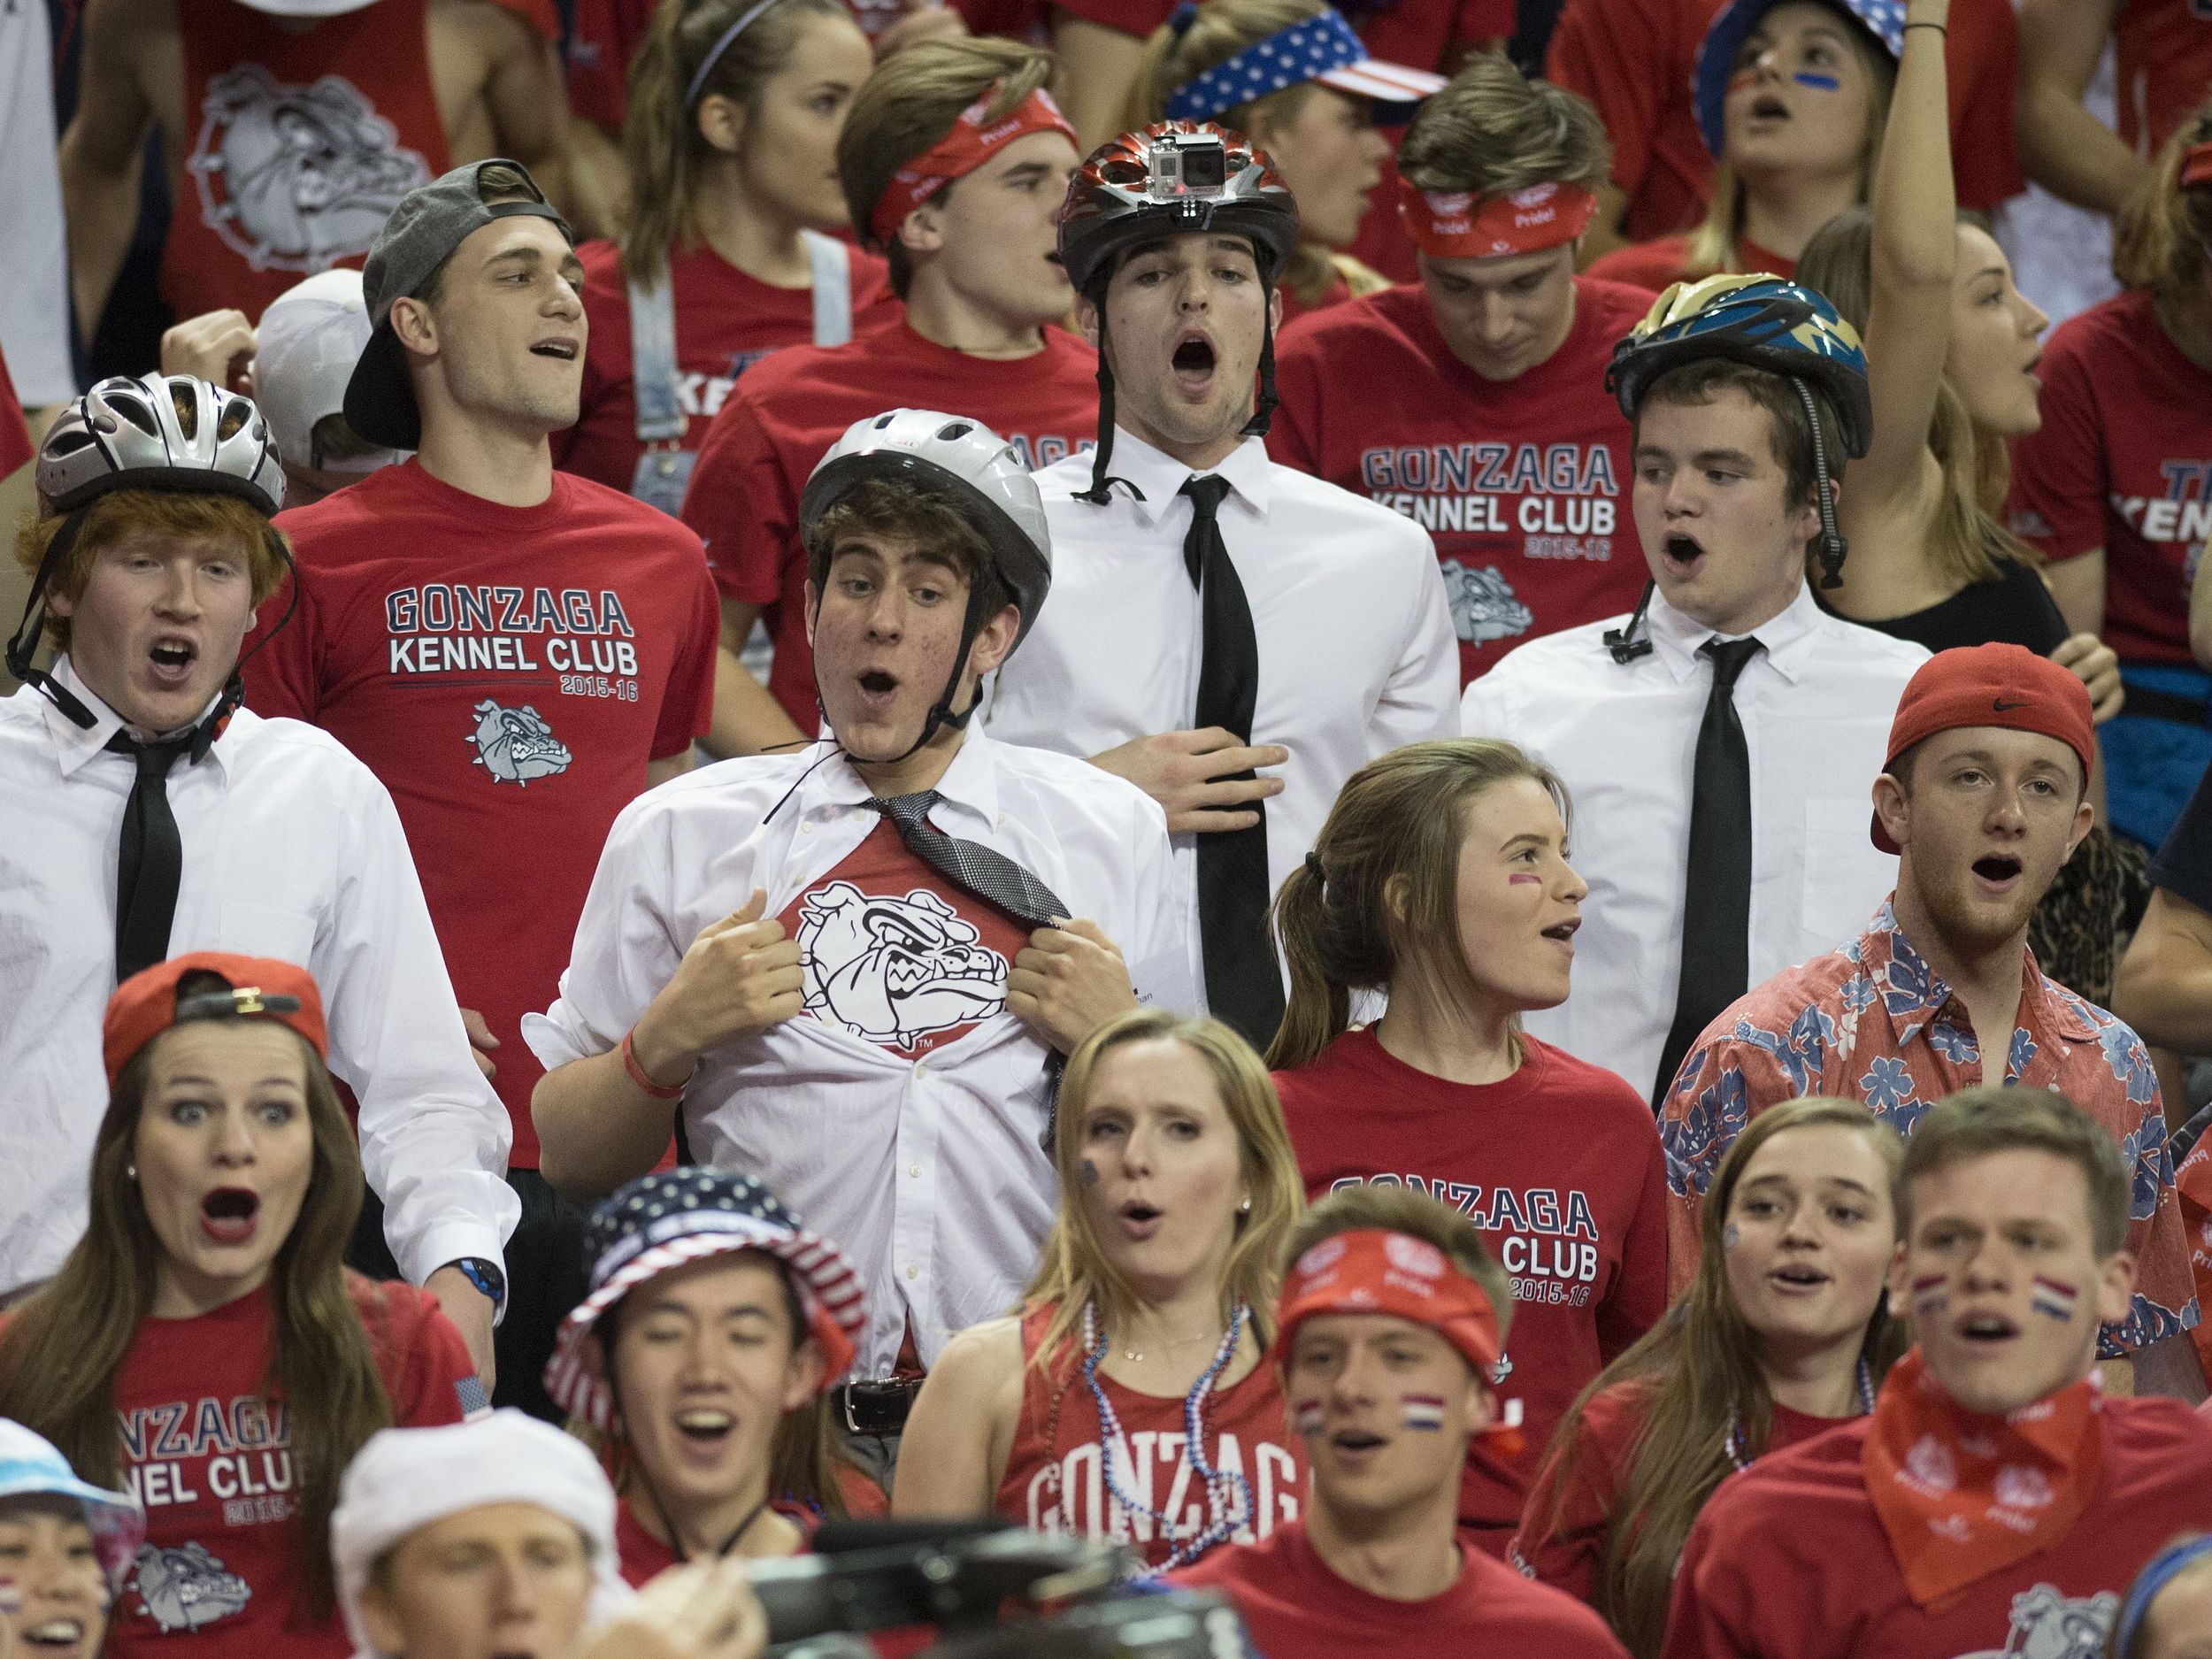 Gonzaga Strives To Keep Rivalry With Byu Respectful The Spokesman Review